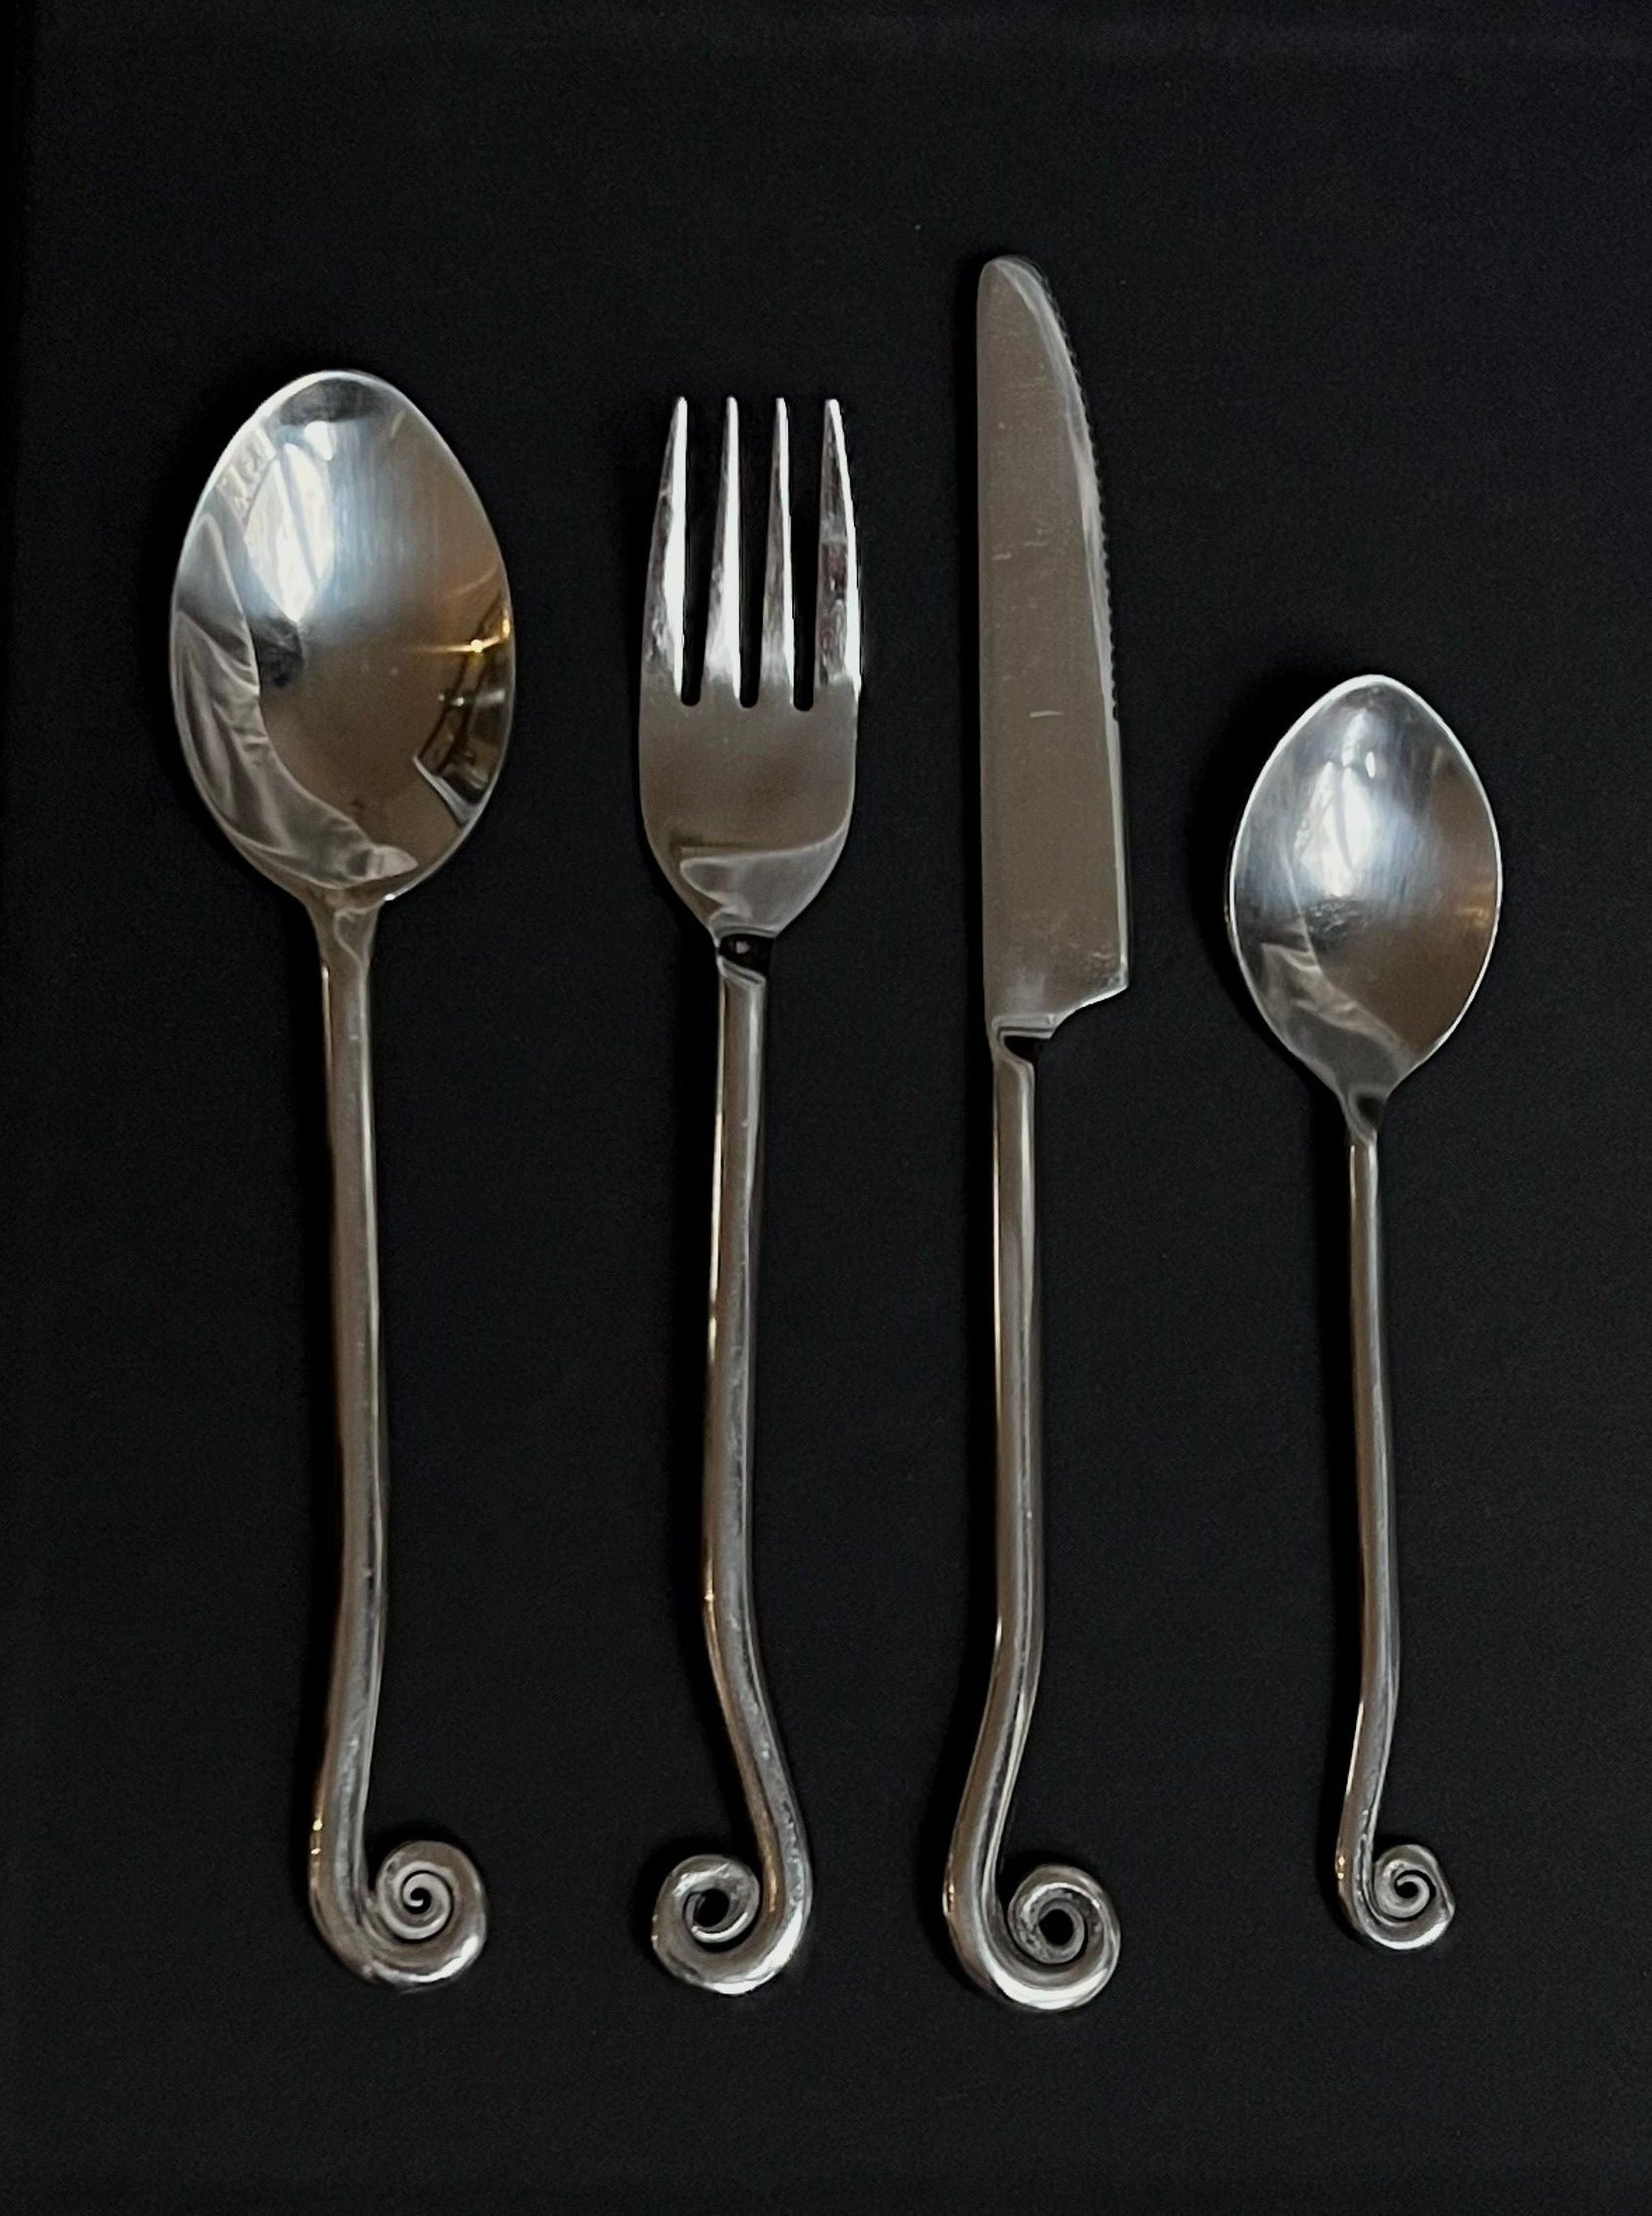 Manushi's Set of Vintage Swirl Cutlery including two spoons, a fork, and a knife with vintage swirl handles, arranged in order on a black background.